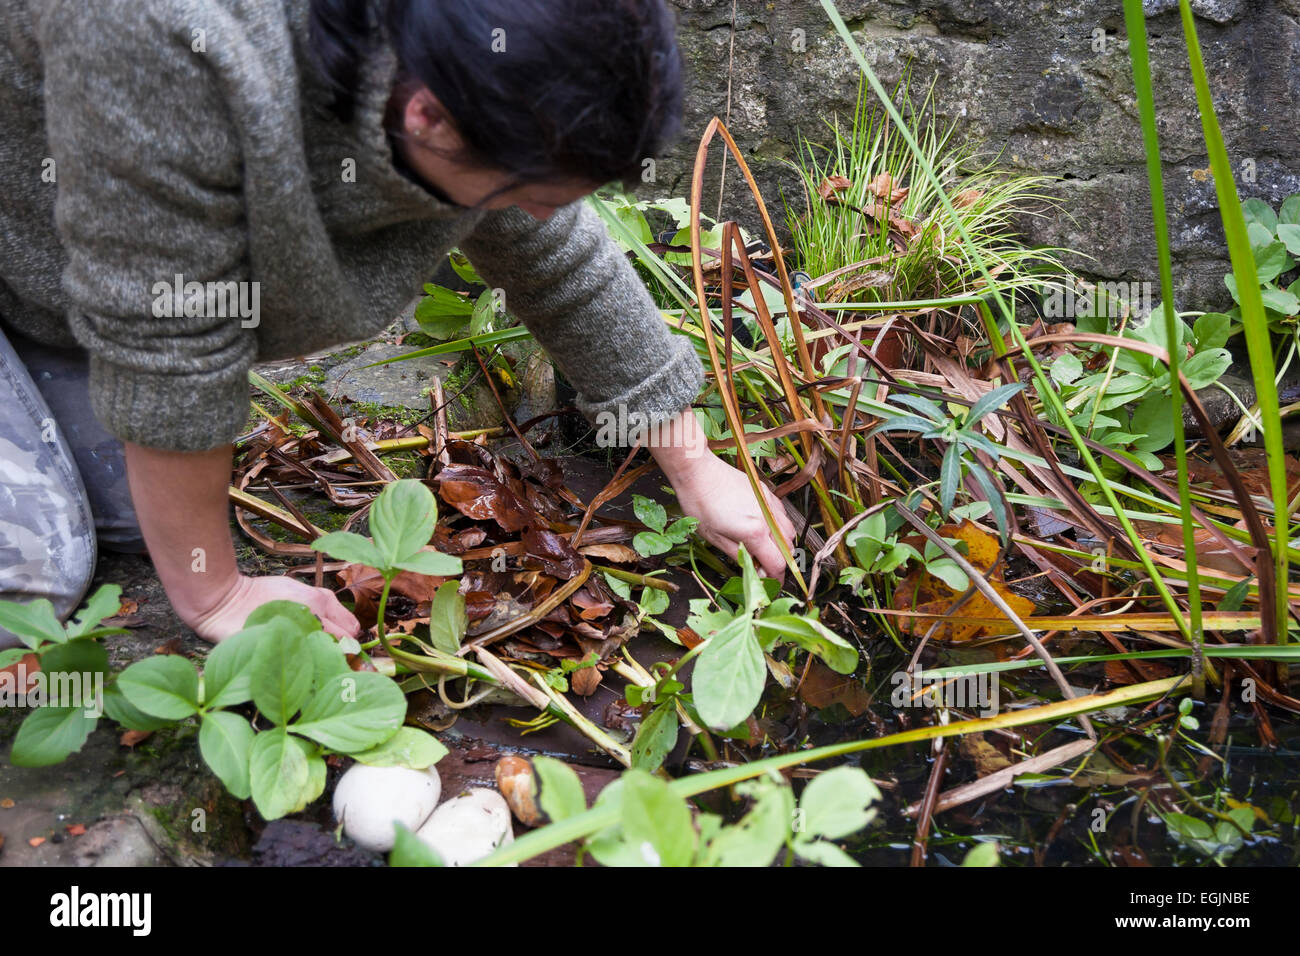 lady gardener kneeling while clearing autumn weeds and leaves from overgrown pond Stock Photo